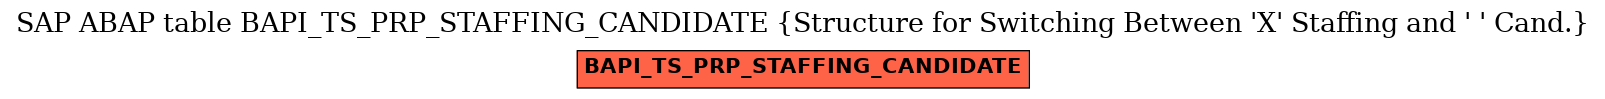 E-R Diagram for table BAPI_TS_PRP_STAFFING_CANDIDATE (Structure for Switching Between 'X' Staffing and ' ' Cand.)